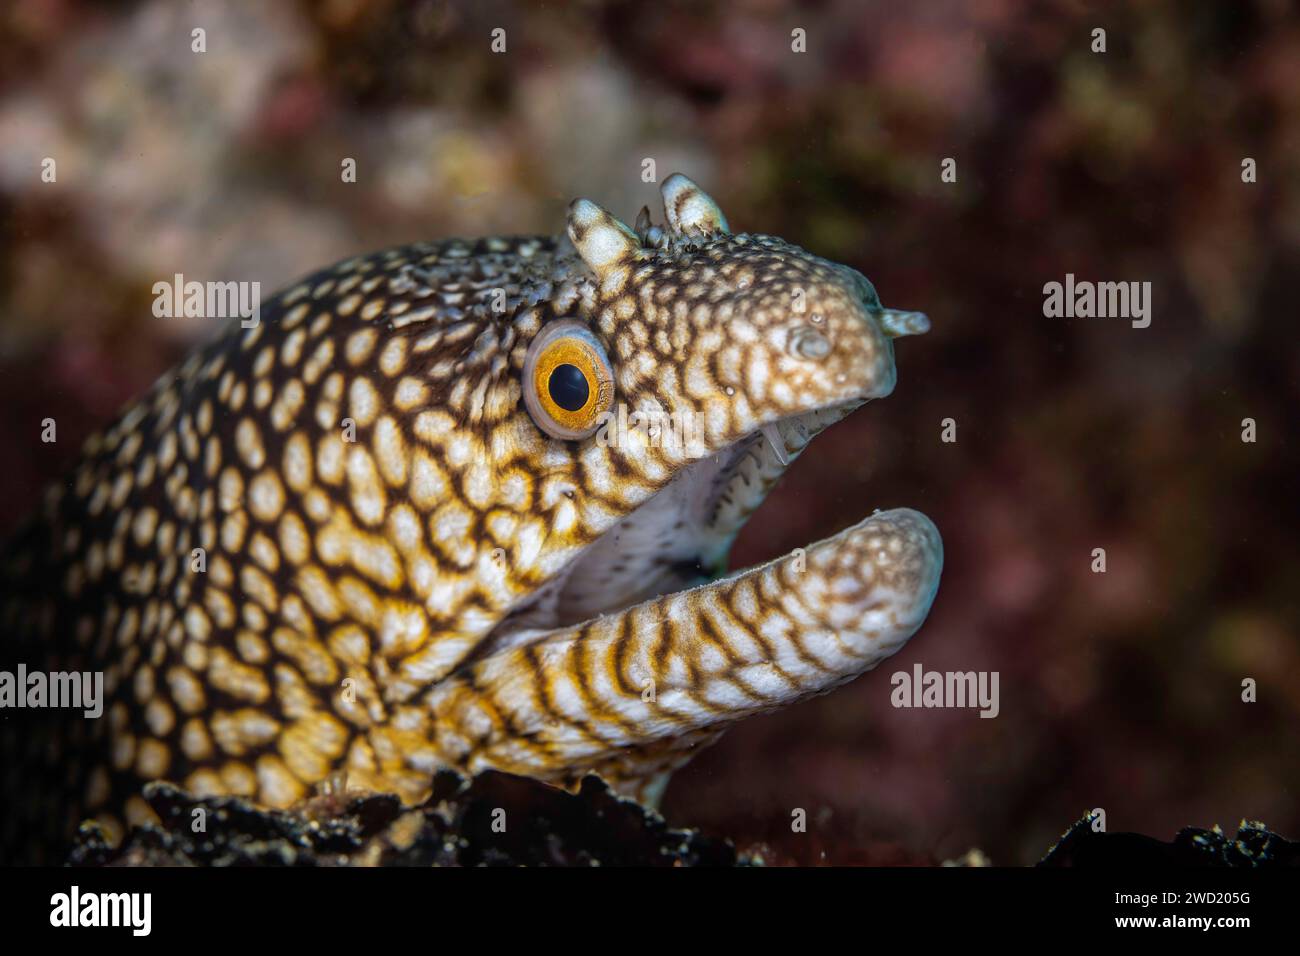 Close-up of a honeycomb moray eel (Muraena melanotis) emerging from a crevice, its textured skin and vivid eye detailed, set against a blurred underwa Stock Photo